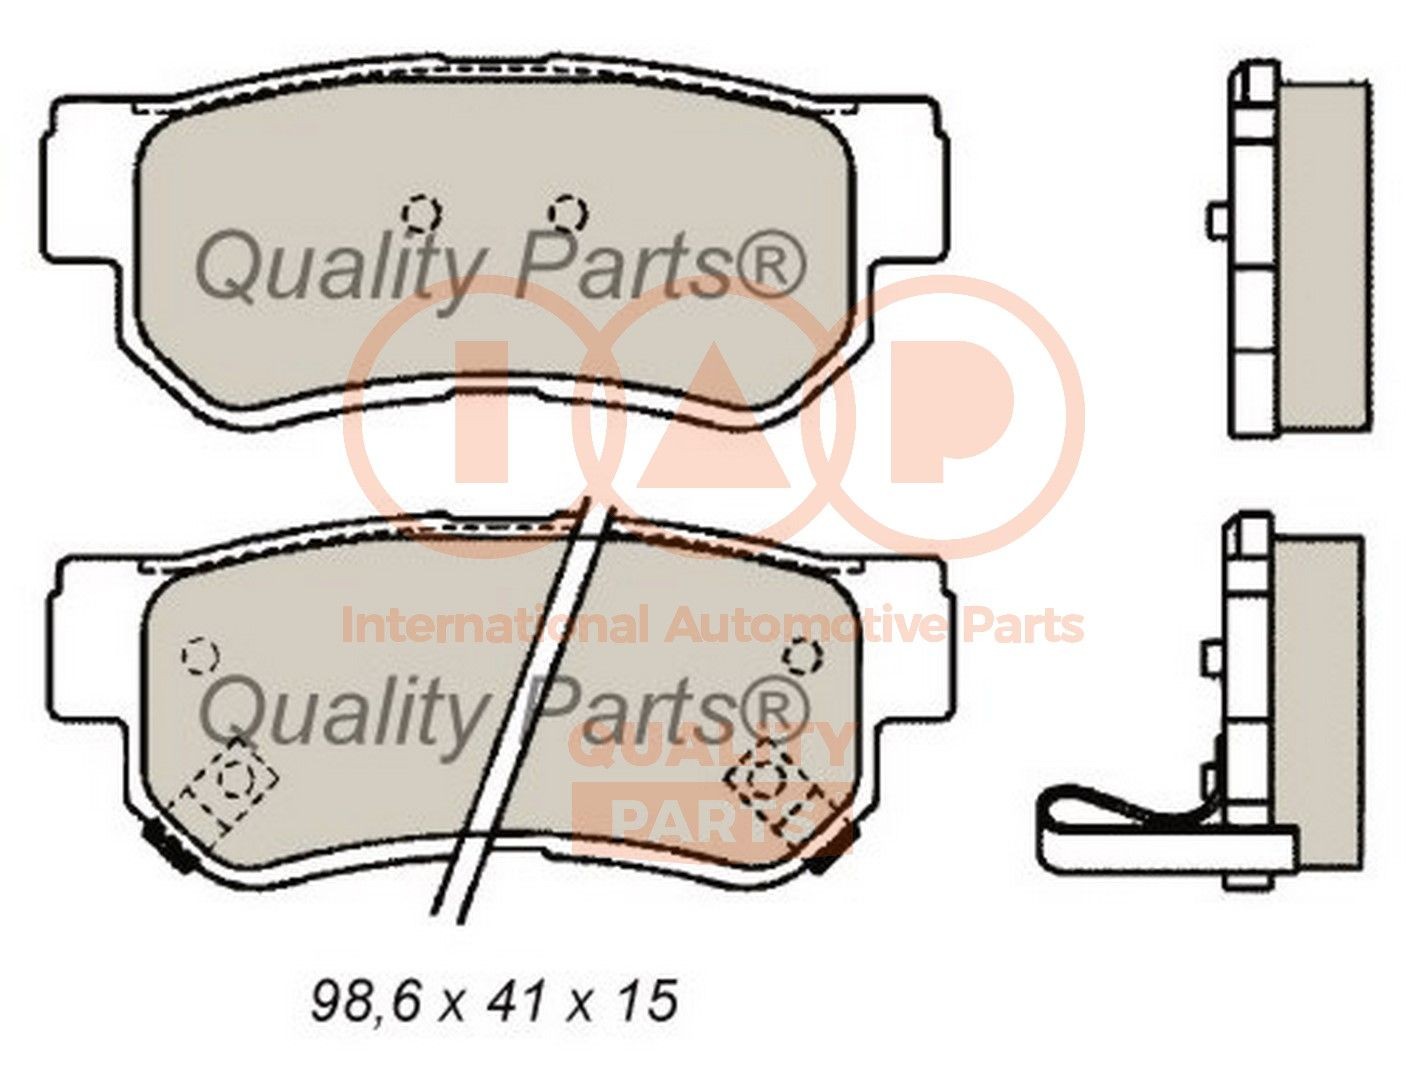 IAP QUALITY PARTS Rear Axle Height 1: 41mm, Width 1: 98,6mm, Thickness 1: 15,5mm Brake pads 704-21023 buy